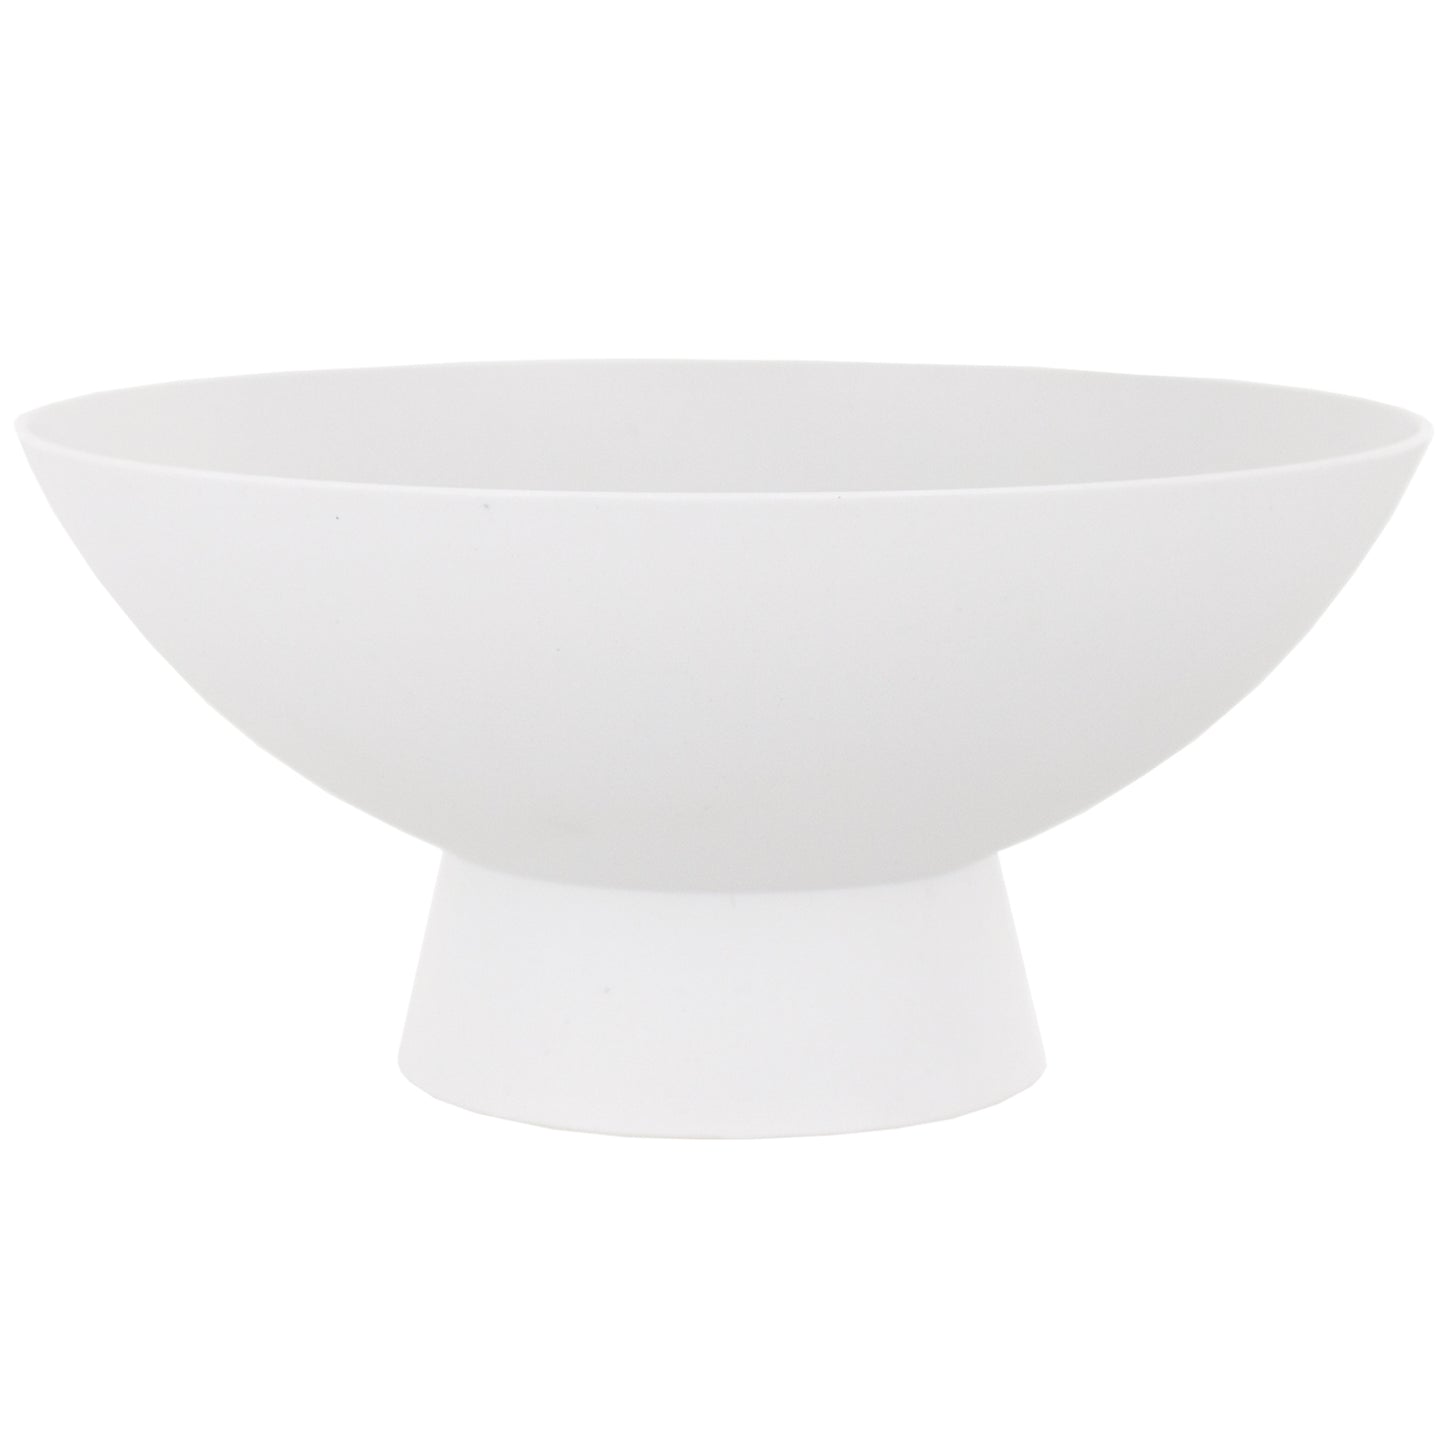 Holly Chapple Demi Plastic Footed Bowl